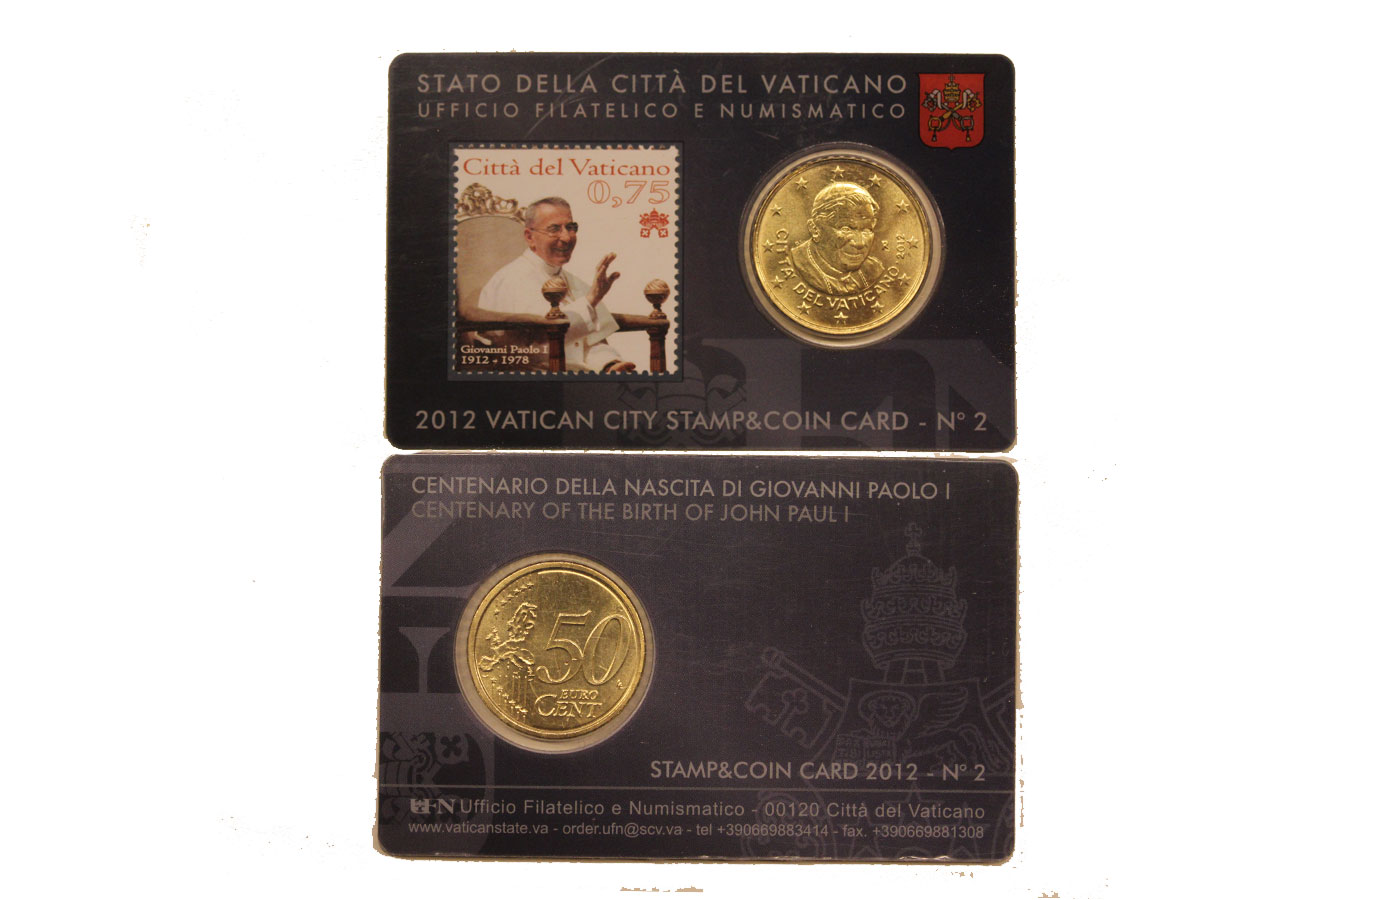 Papa Benedetto XVI - Stamp & coincard n 2